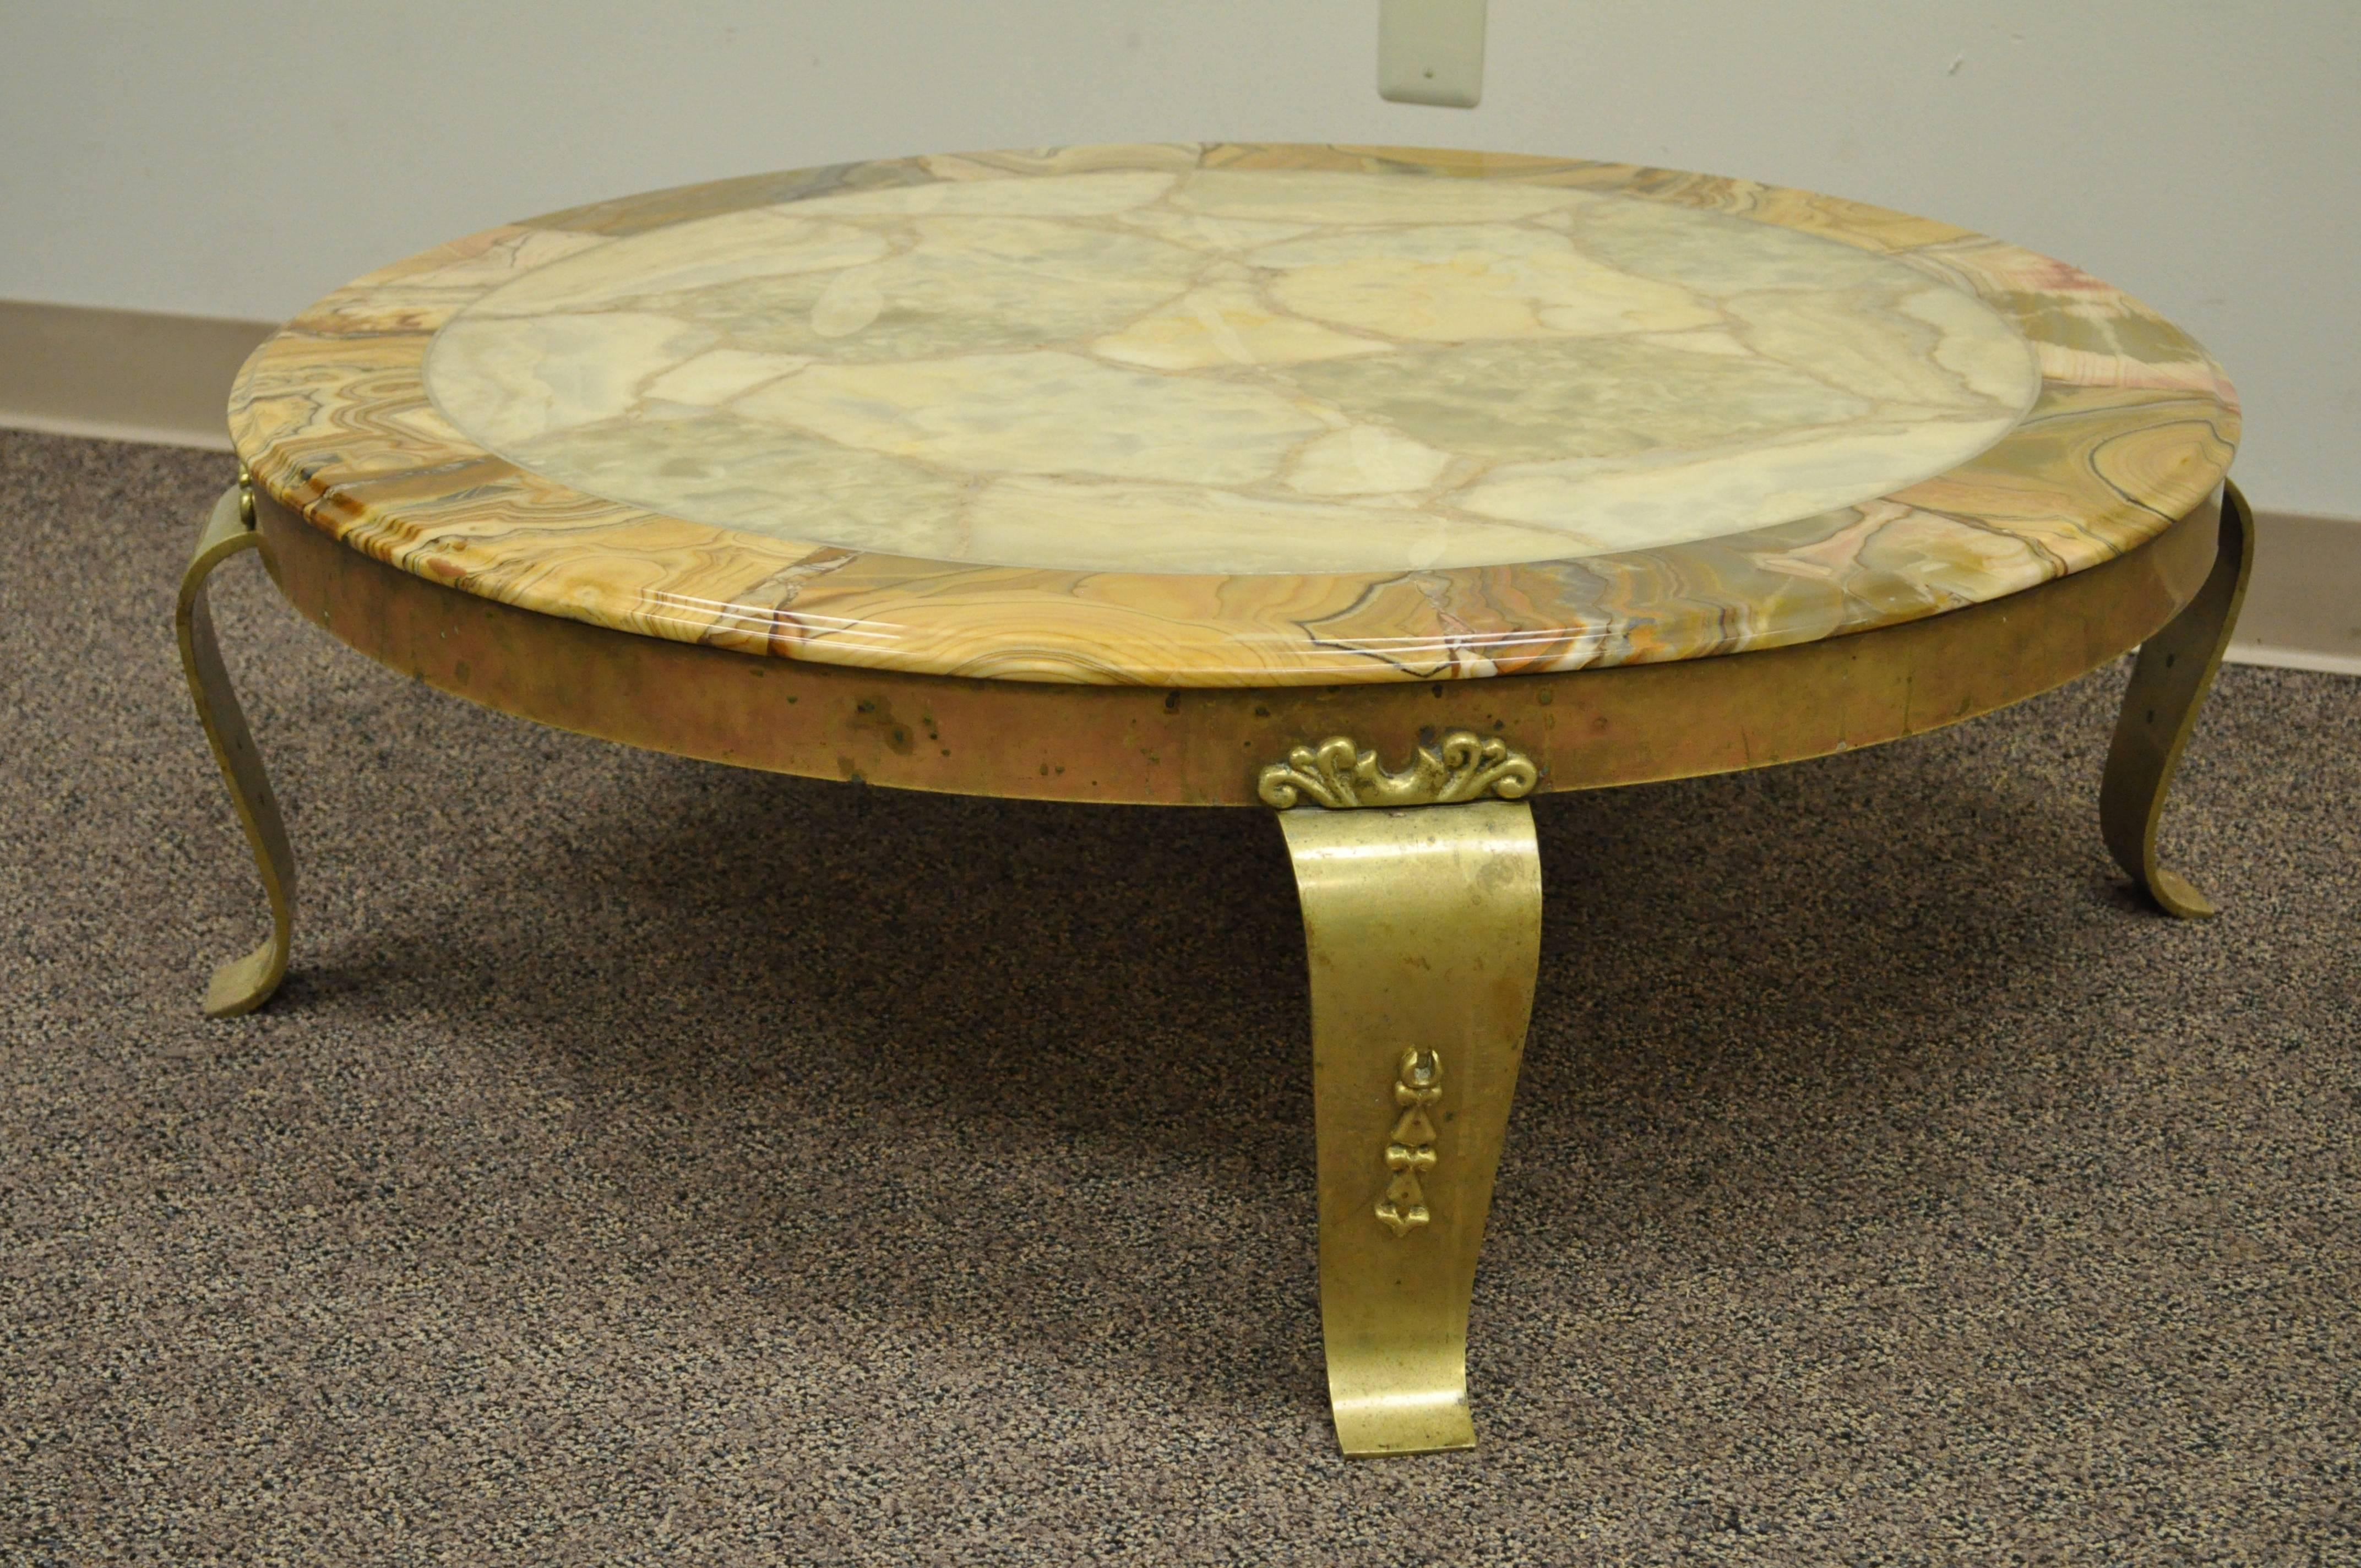 Mid-20th Century Brass and Onyx Round Coffee Table by Muller's of Mexico Attr. to Arturo Pani